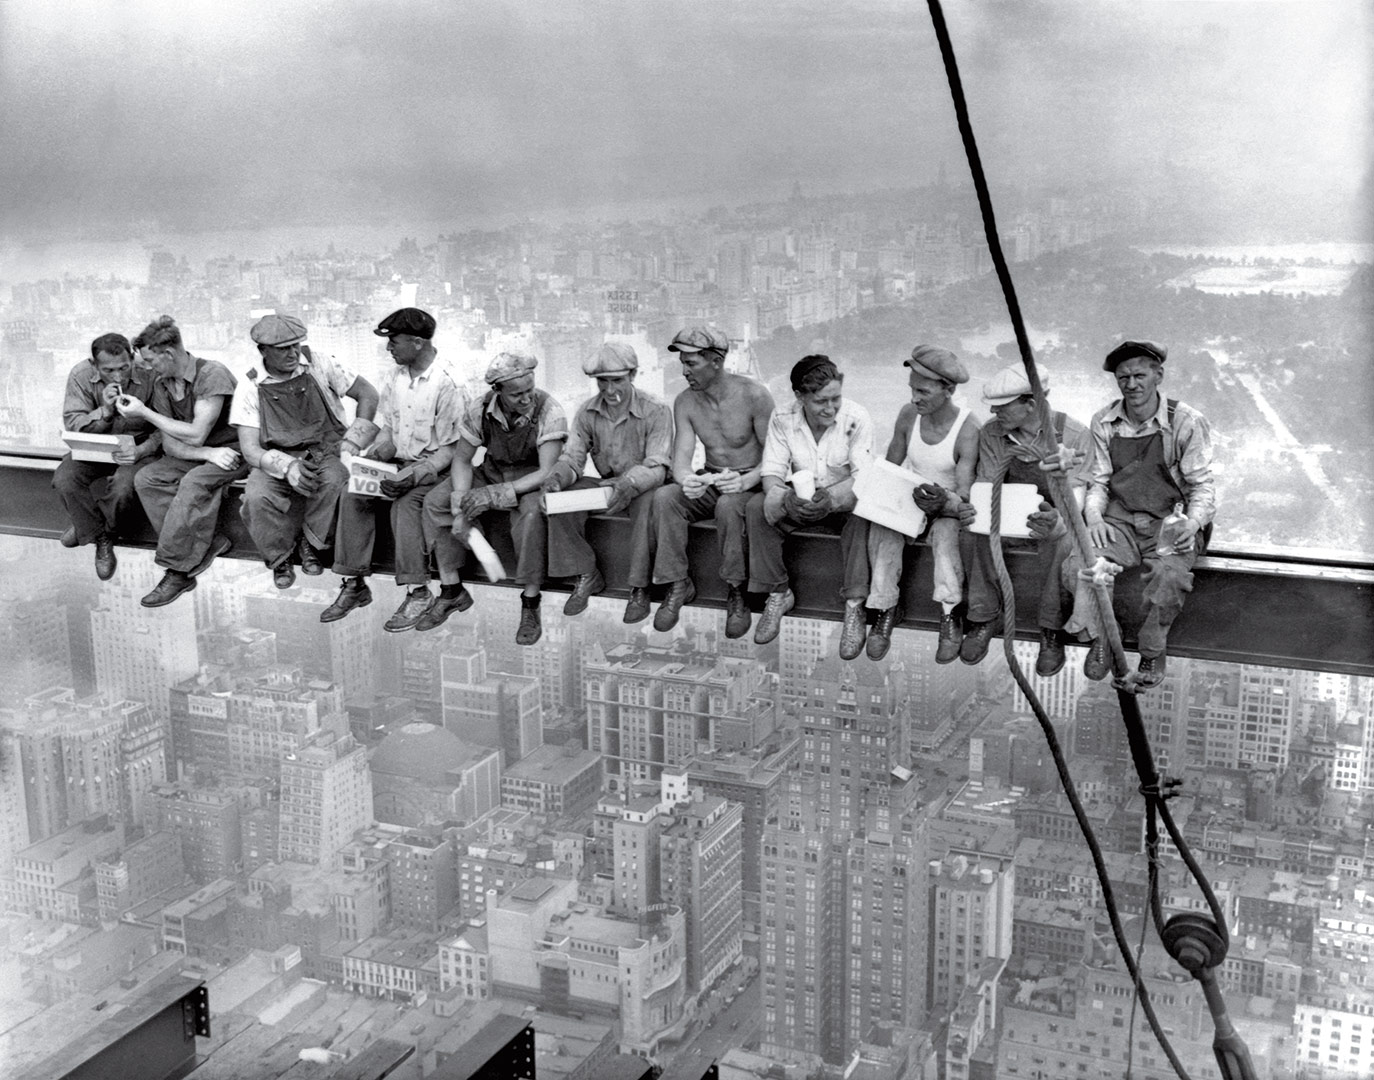 Lunch Atop a Skyscraper -  This famous picture, depicting construction workers having lunch on a girder on top of a skyscraper in Rockefeller Center, New York, is actually a staged publicity photo intended to drum up excitement for the project’s impending completion (I guess construction workers don’t really eat their lunch on steel girders). Still, they really are dangling their feet 850 feet above the ground, harness-free.